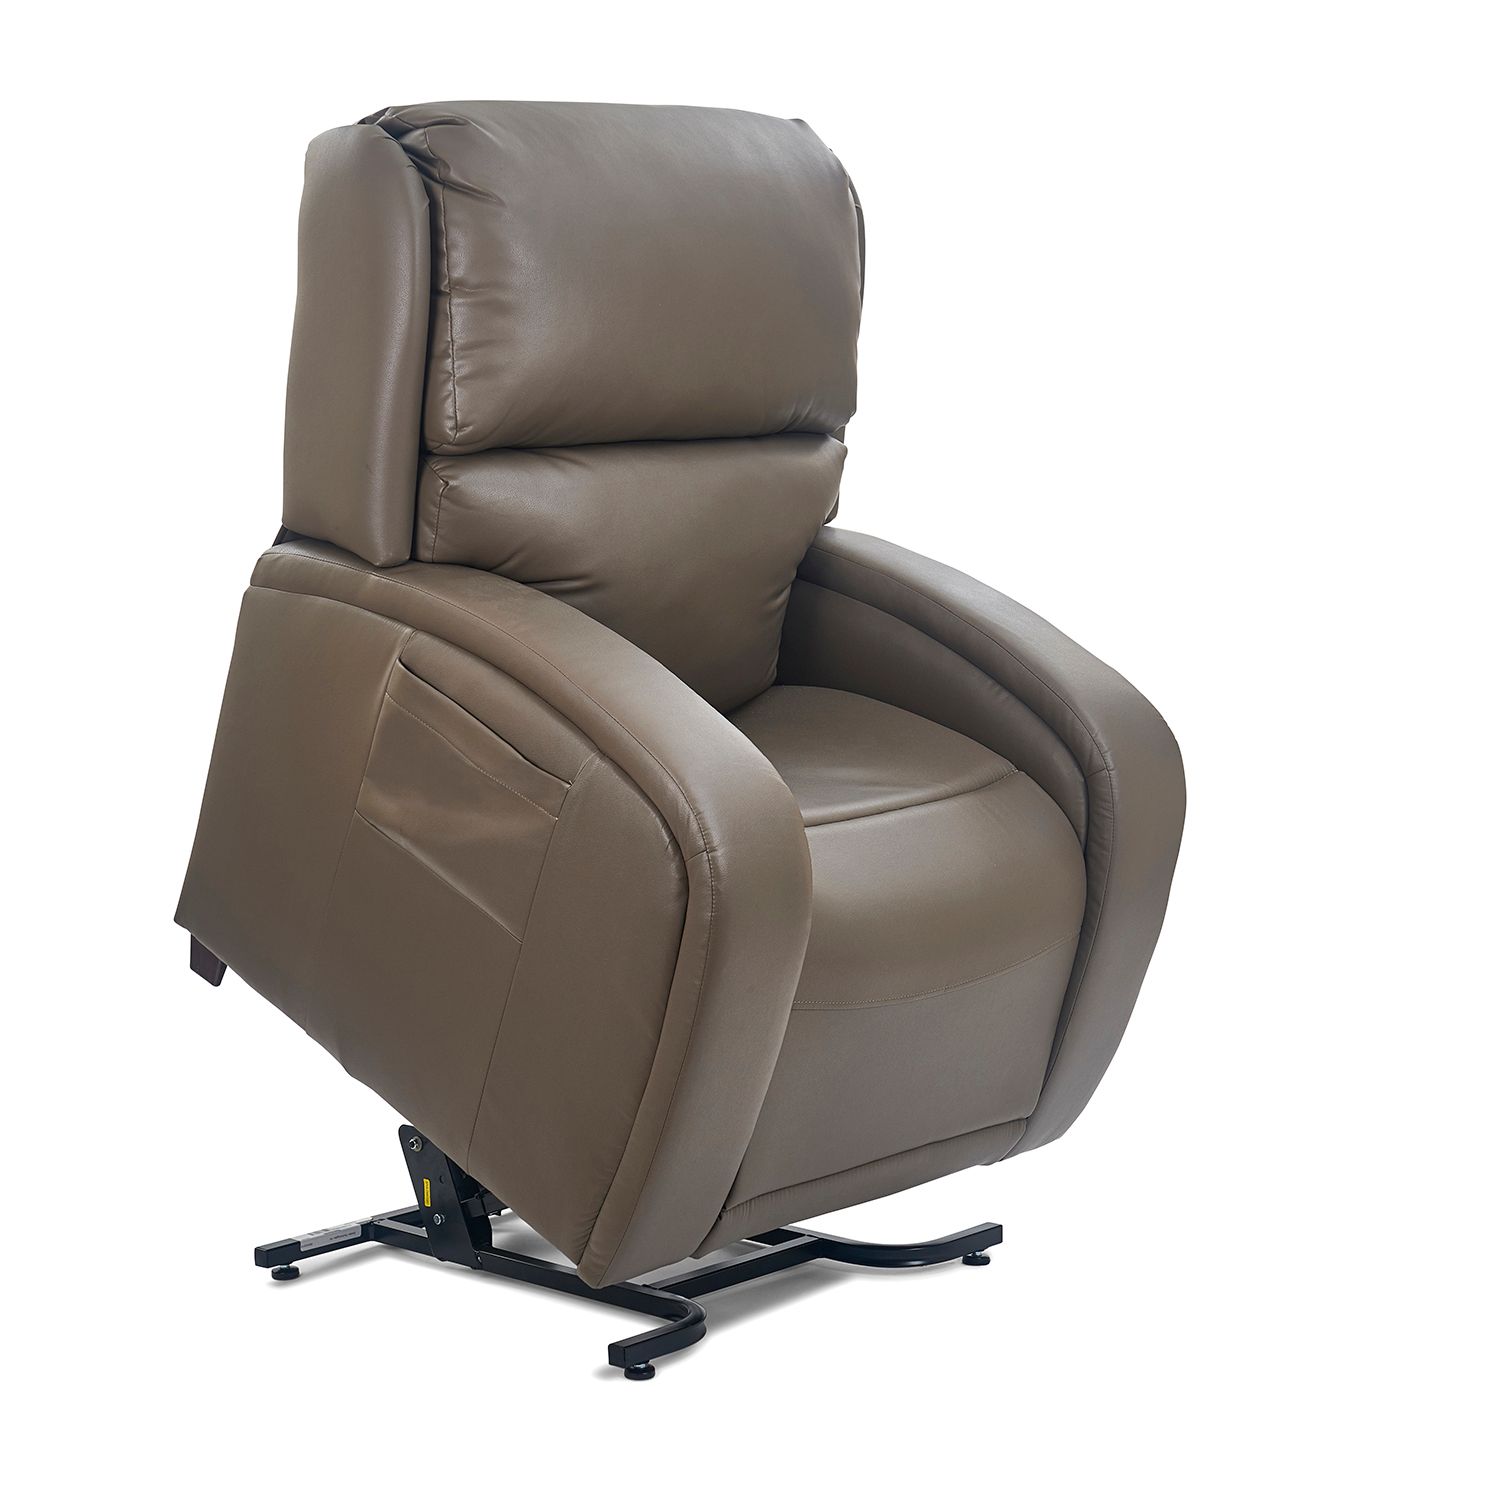 Riverside buy sell used golden tech liftchair recliner are the relaxer cloud twilight viva maxi-comfort